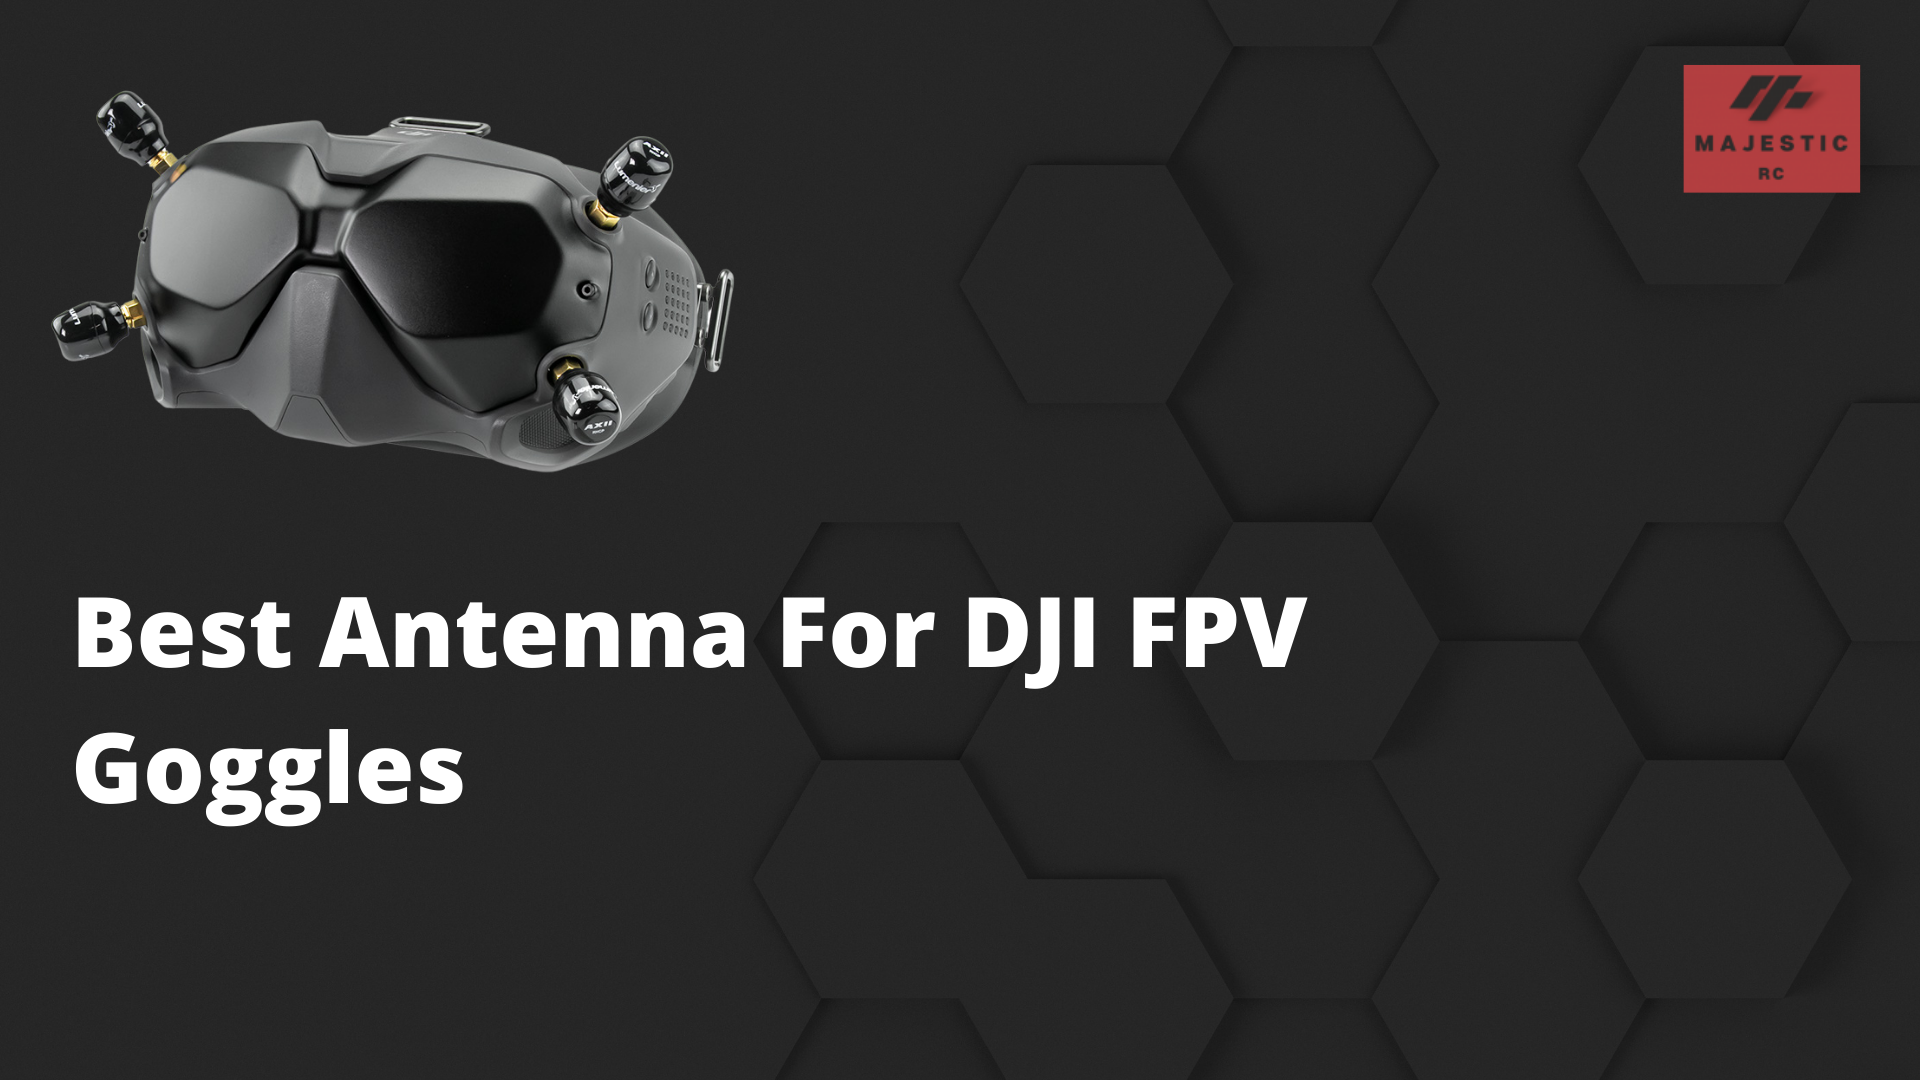 Best Antenna For DJI FPV Goggles